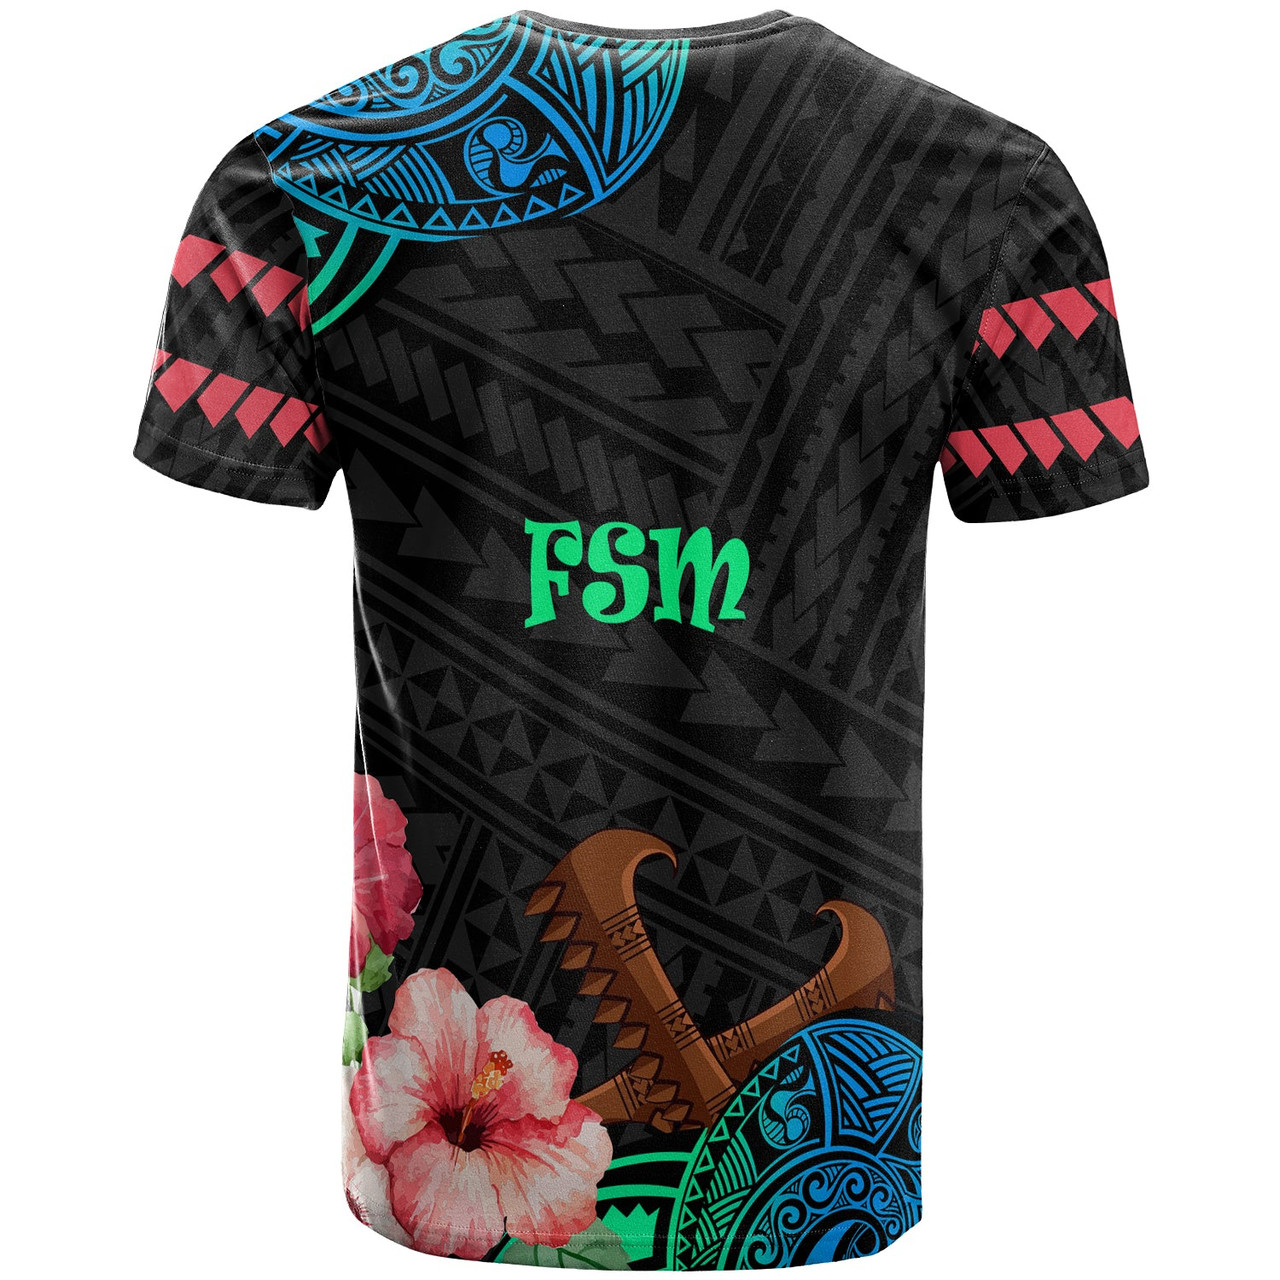 Federated States of Micronesia T-Shirt - Polynesian Pride with Hibicus Flower Tribal Pattern